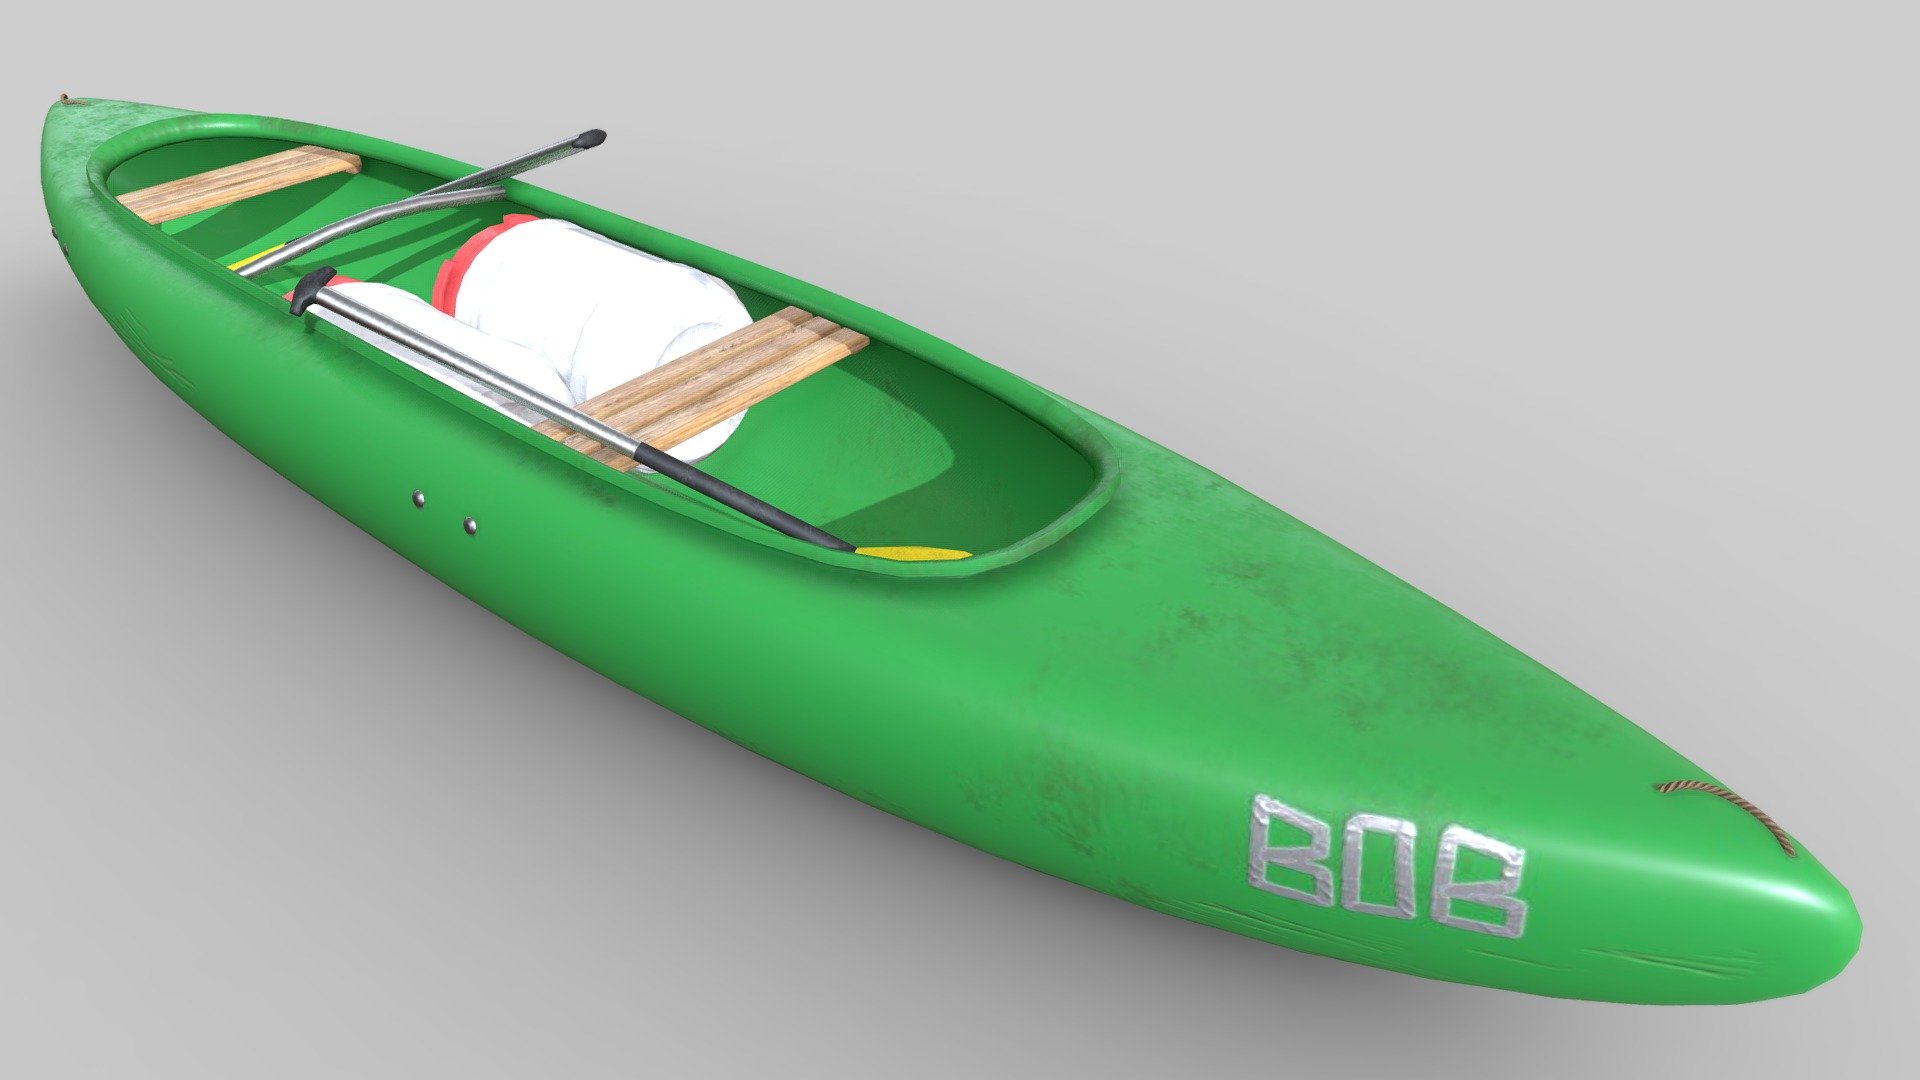 Simple green plastic canoe with paddles and barrels.

One 2K pbr texture set. 
Blender and Substance Painter 3d model